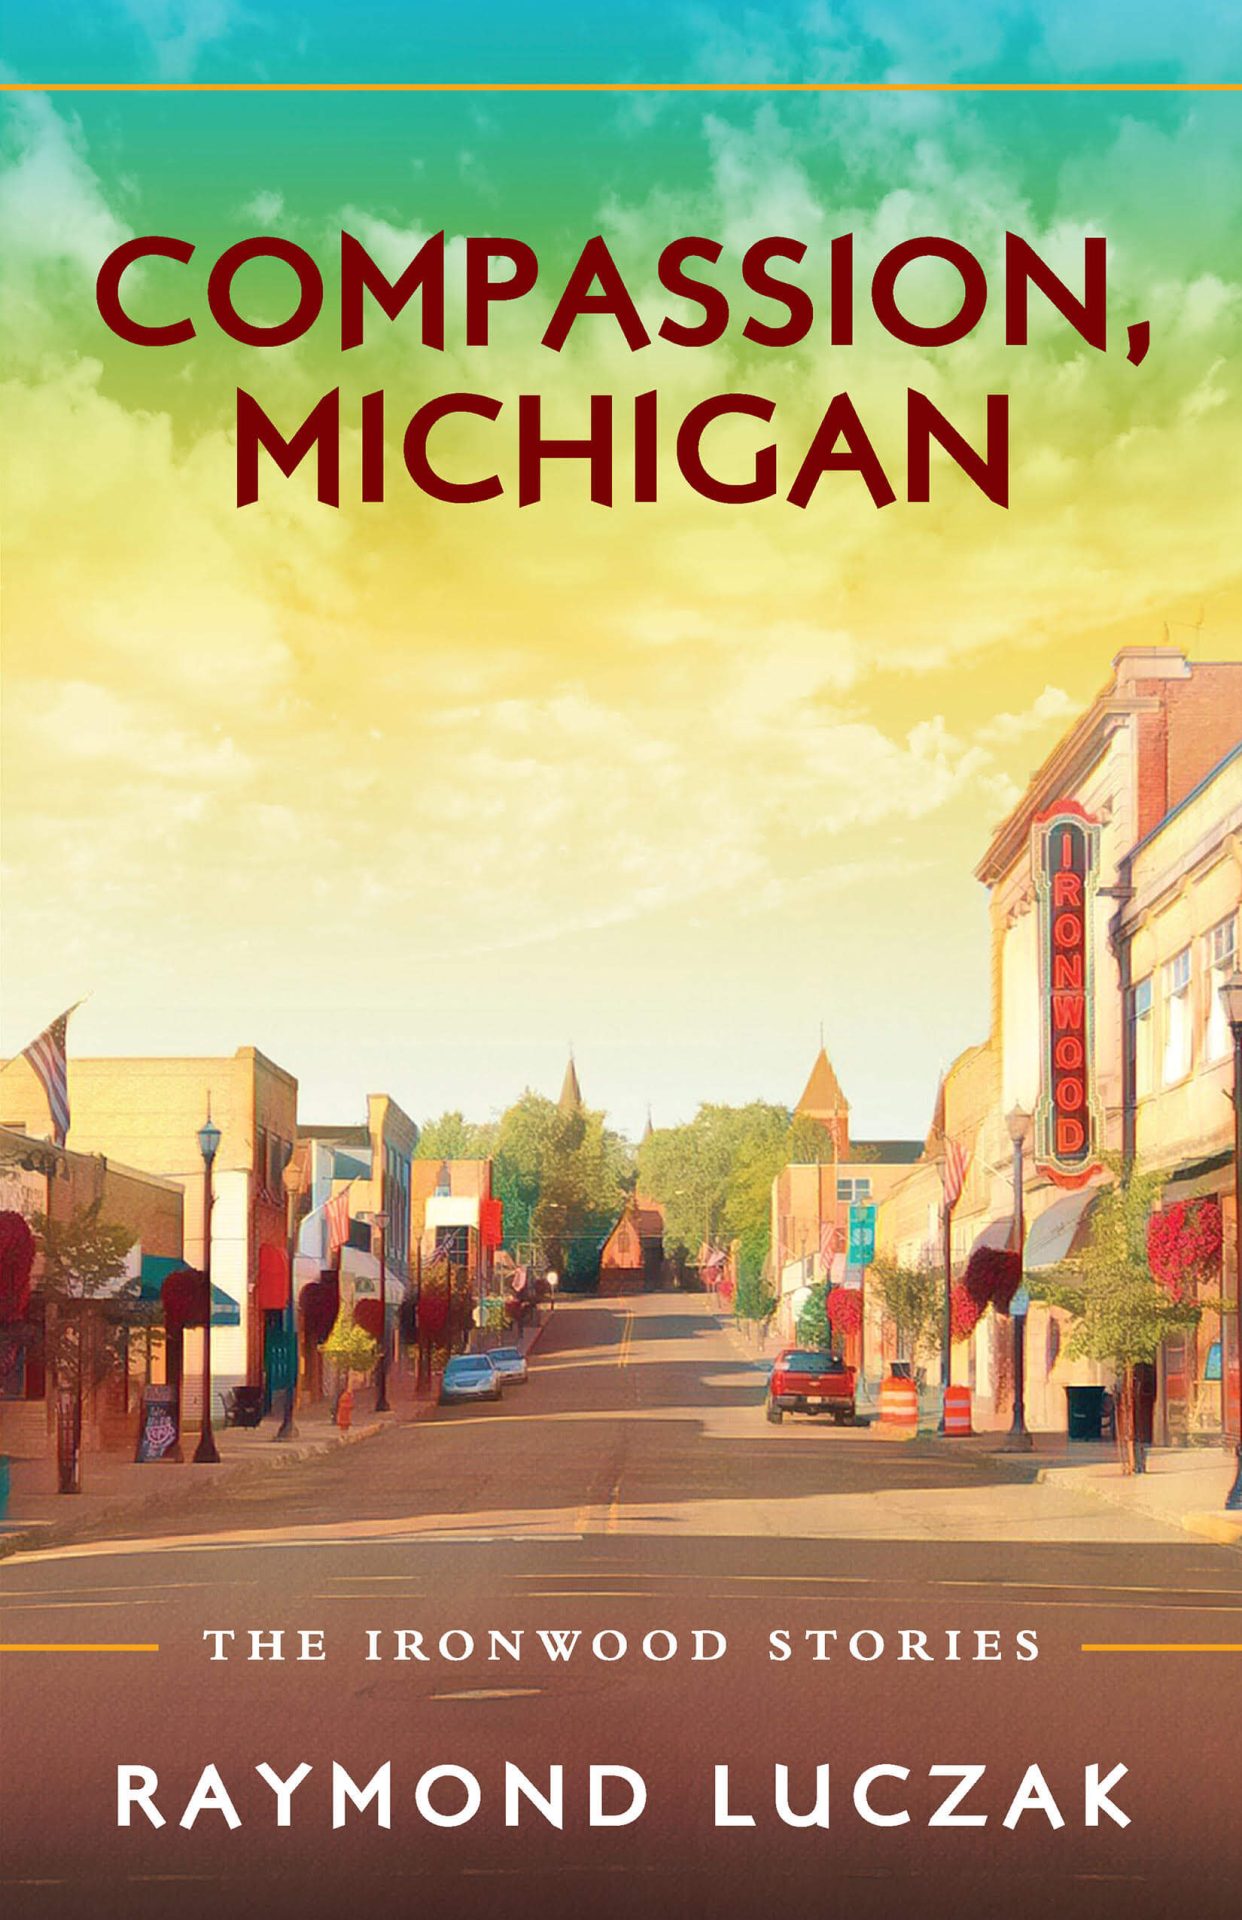 A quiet street in the downtown of a small town shows a few cars parked in the distance; large shadows cross the street. Above the town is a green-yellow-tint of a cloudy sky. Across the sky is the text COMPASSION, MICHIGAN. In the bottom of the street image is the text THE IRONWOOD STORIES | RAYMOND LUCZAK.